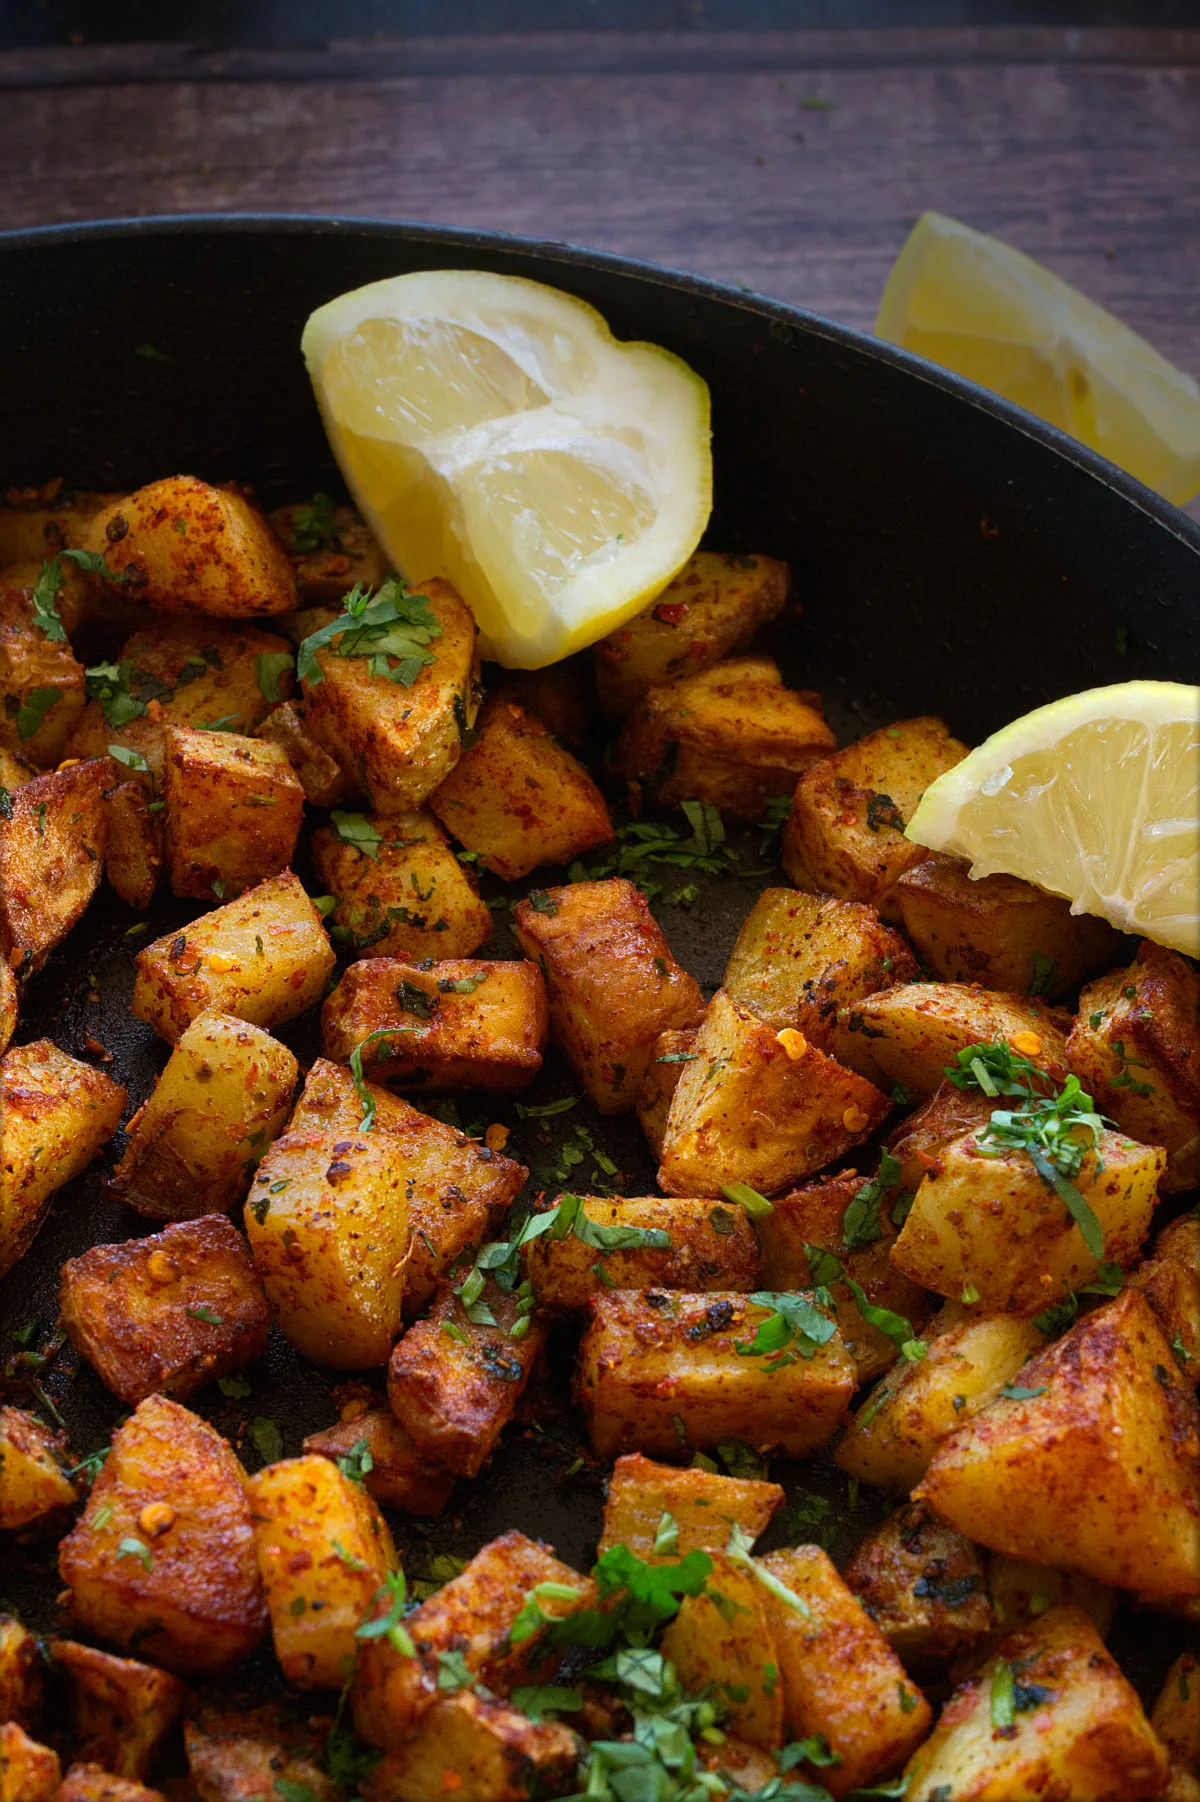 A pan or batata harra with some fresh chopped cilantro and lemon wedges.